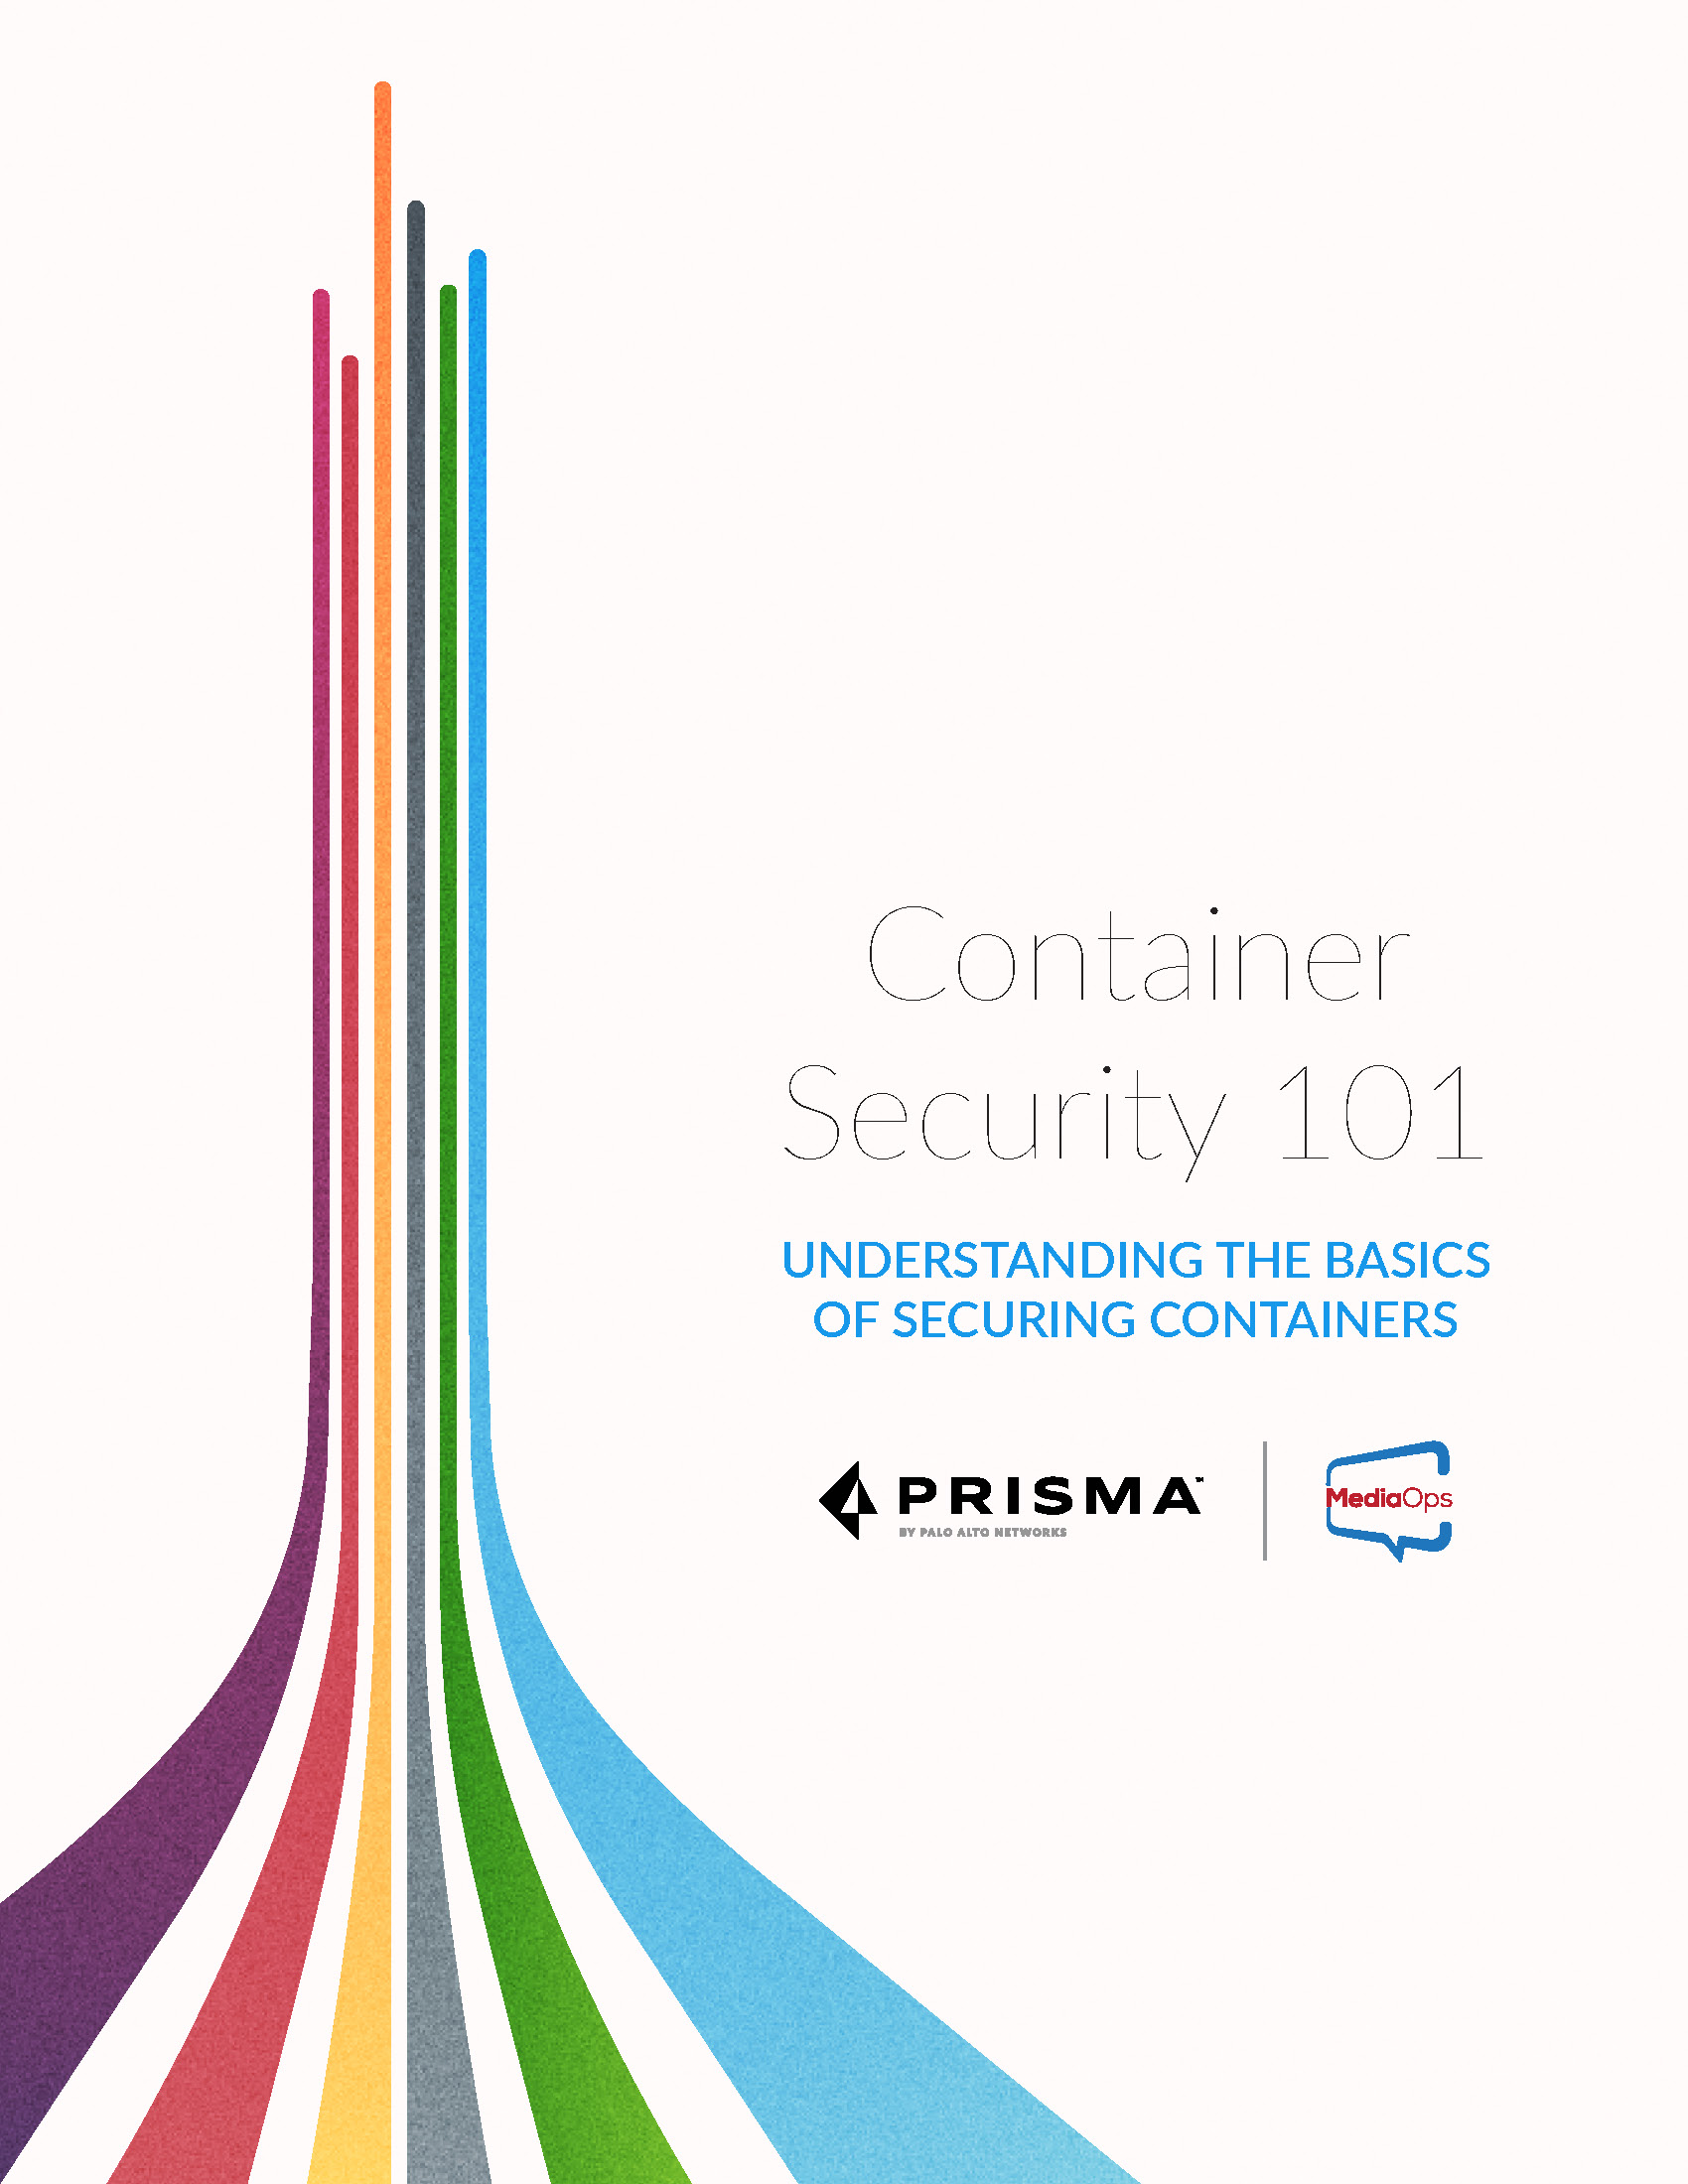 prisma-container-security101 (1)_Page_1